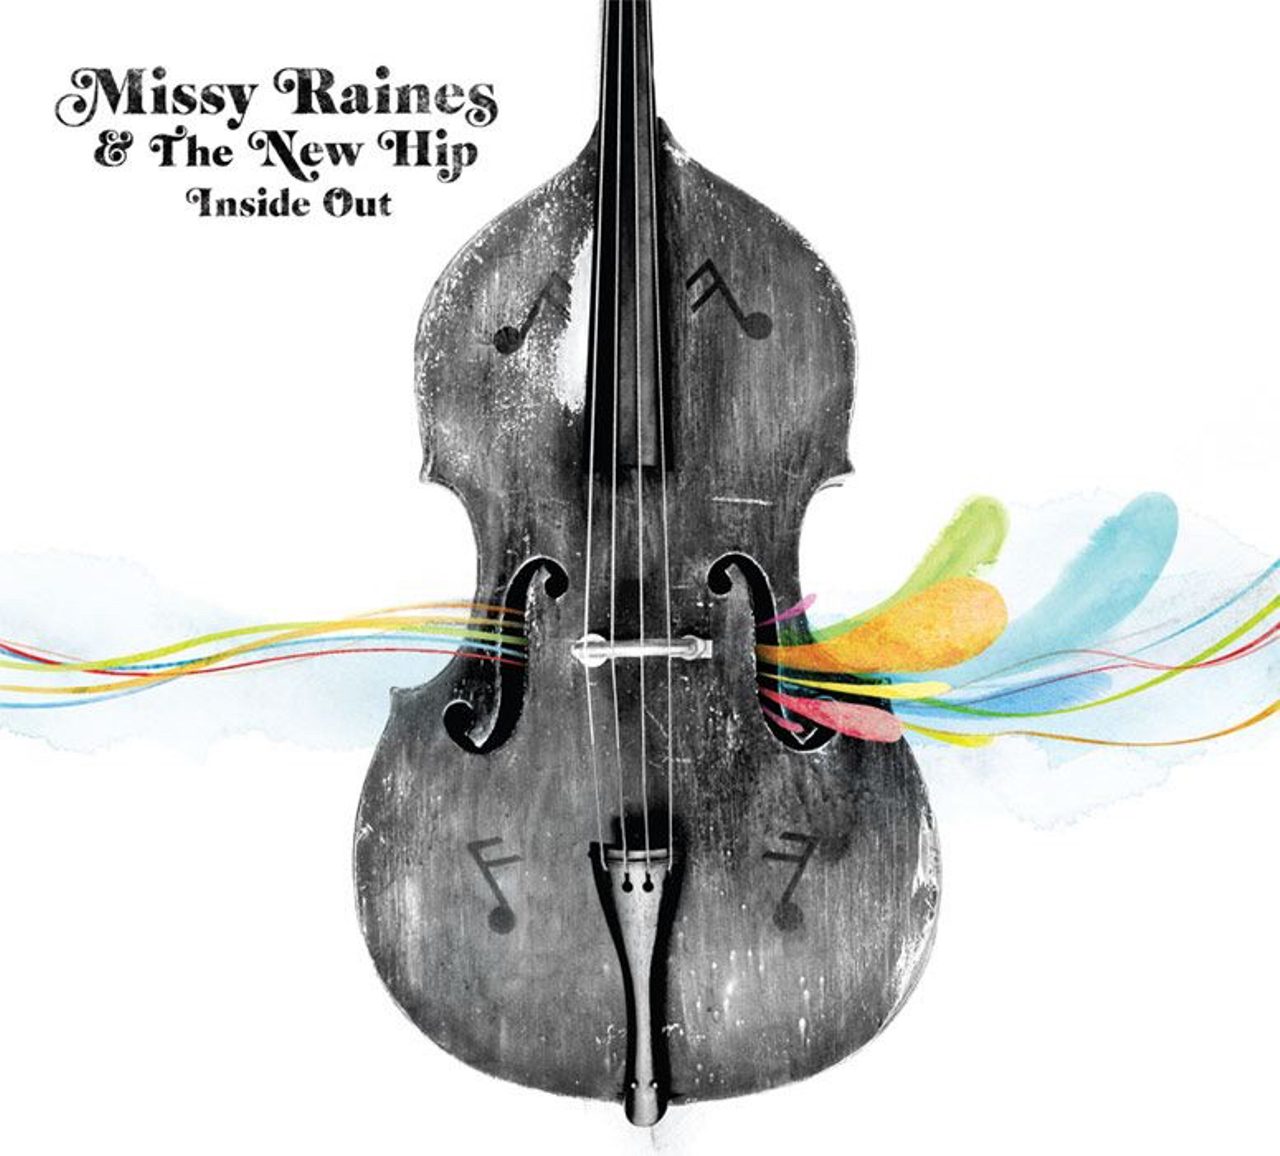 Missy Raines & The New Hip - Inside Out cover album